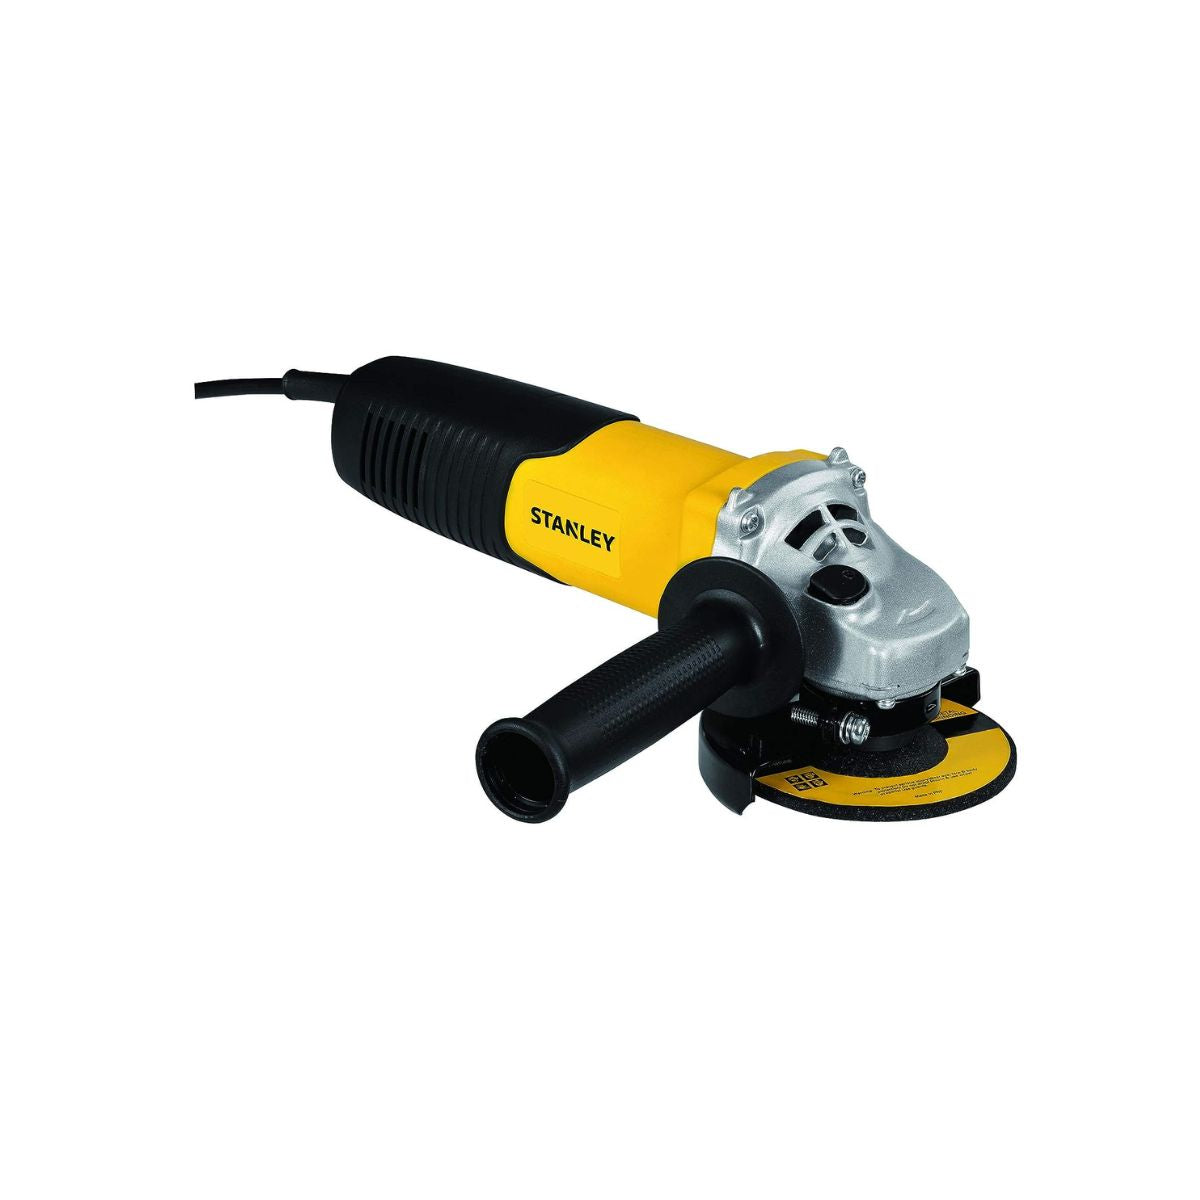 Stanley (STGS9125-IN) 900w Small Angle Grinder